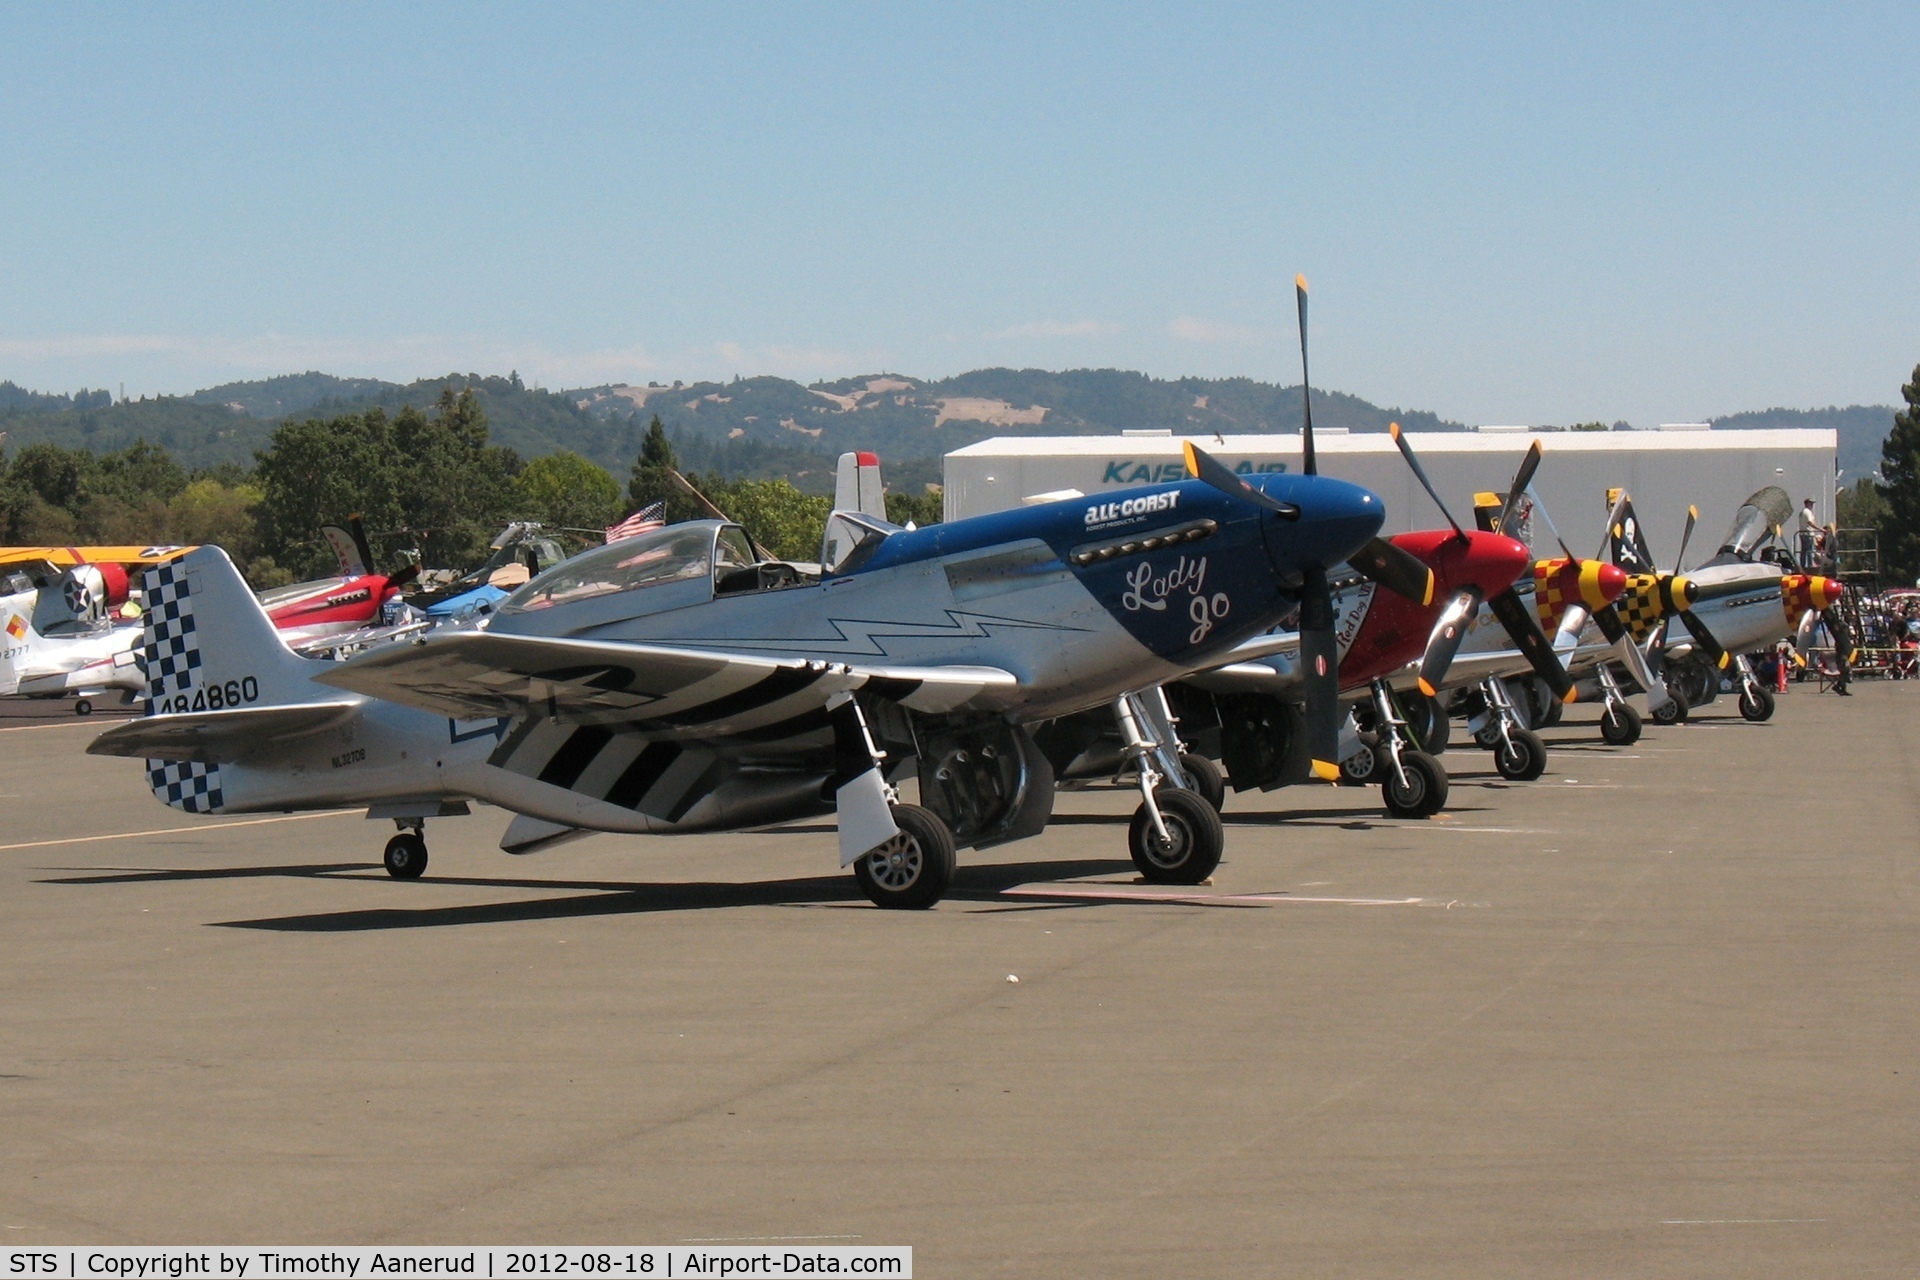 Charles M. Schulz - Sonoma County Airport (STS) - Mustangs at Wings over Wing Country airshow